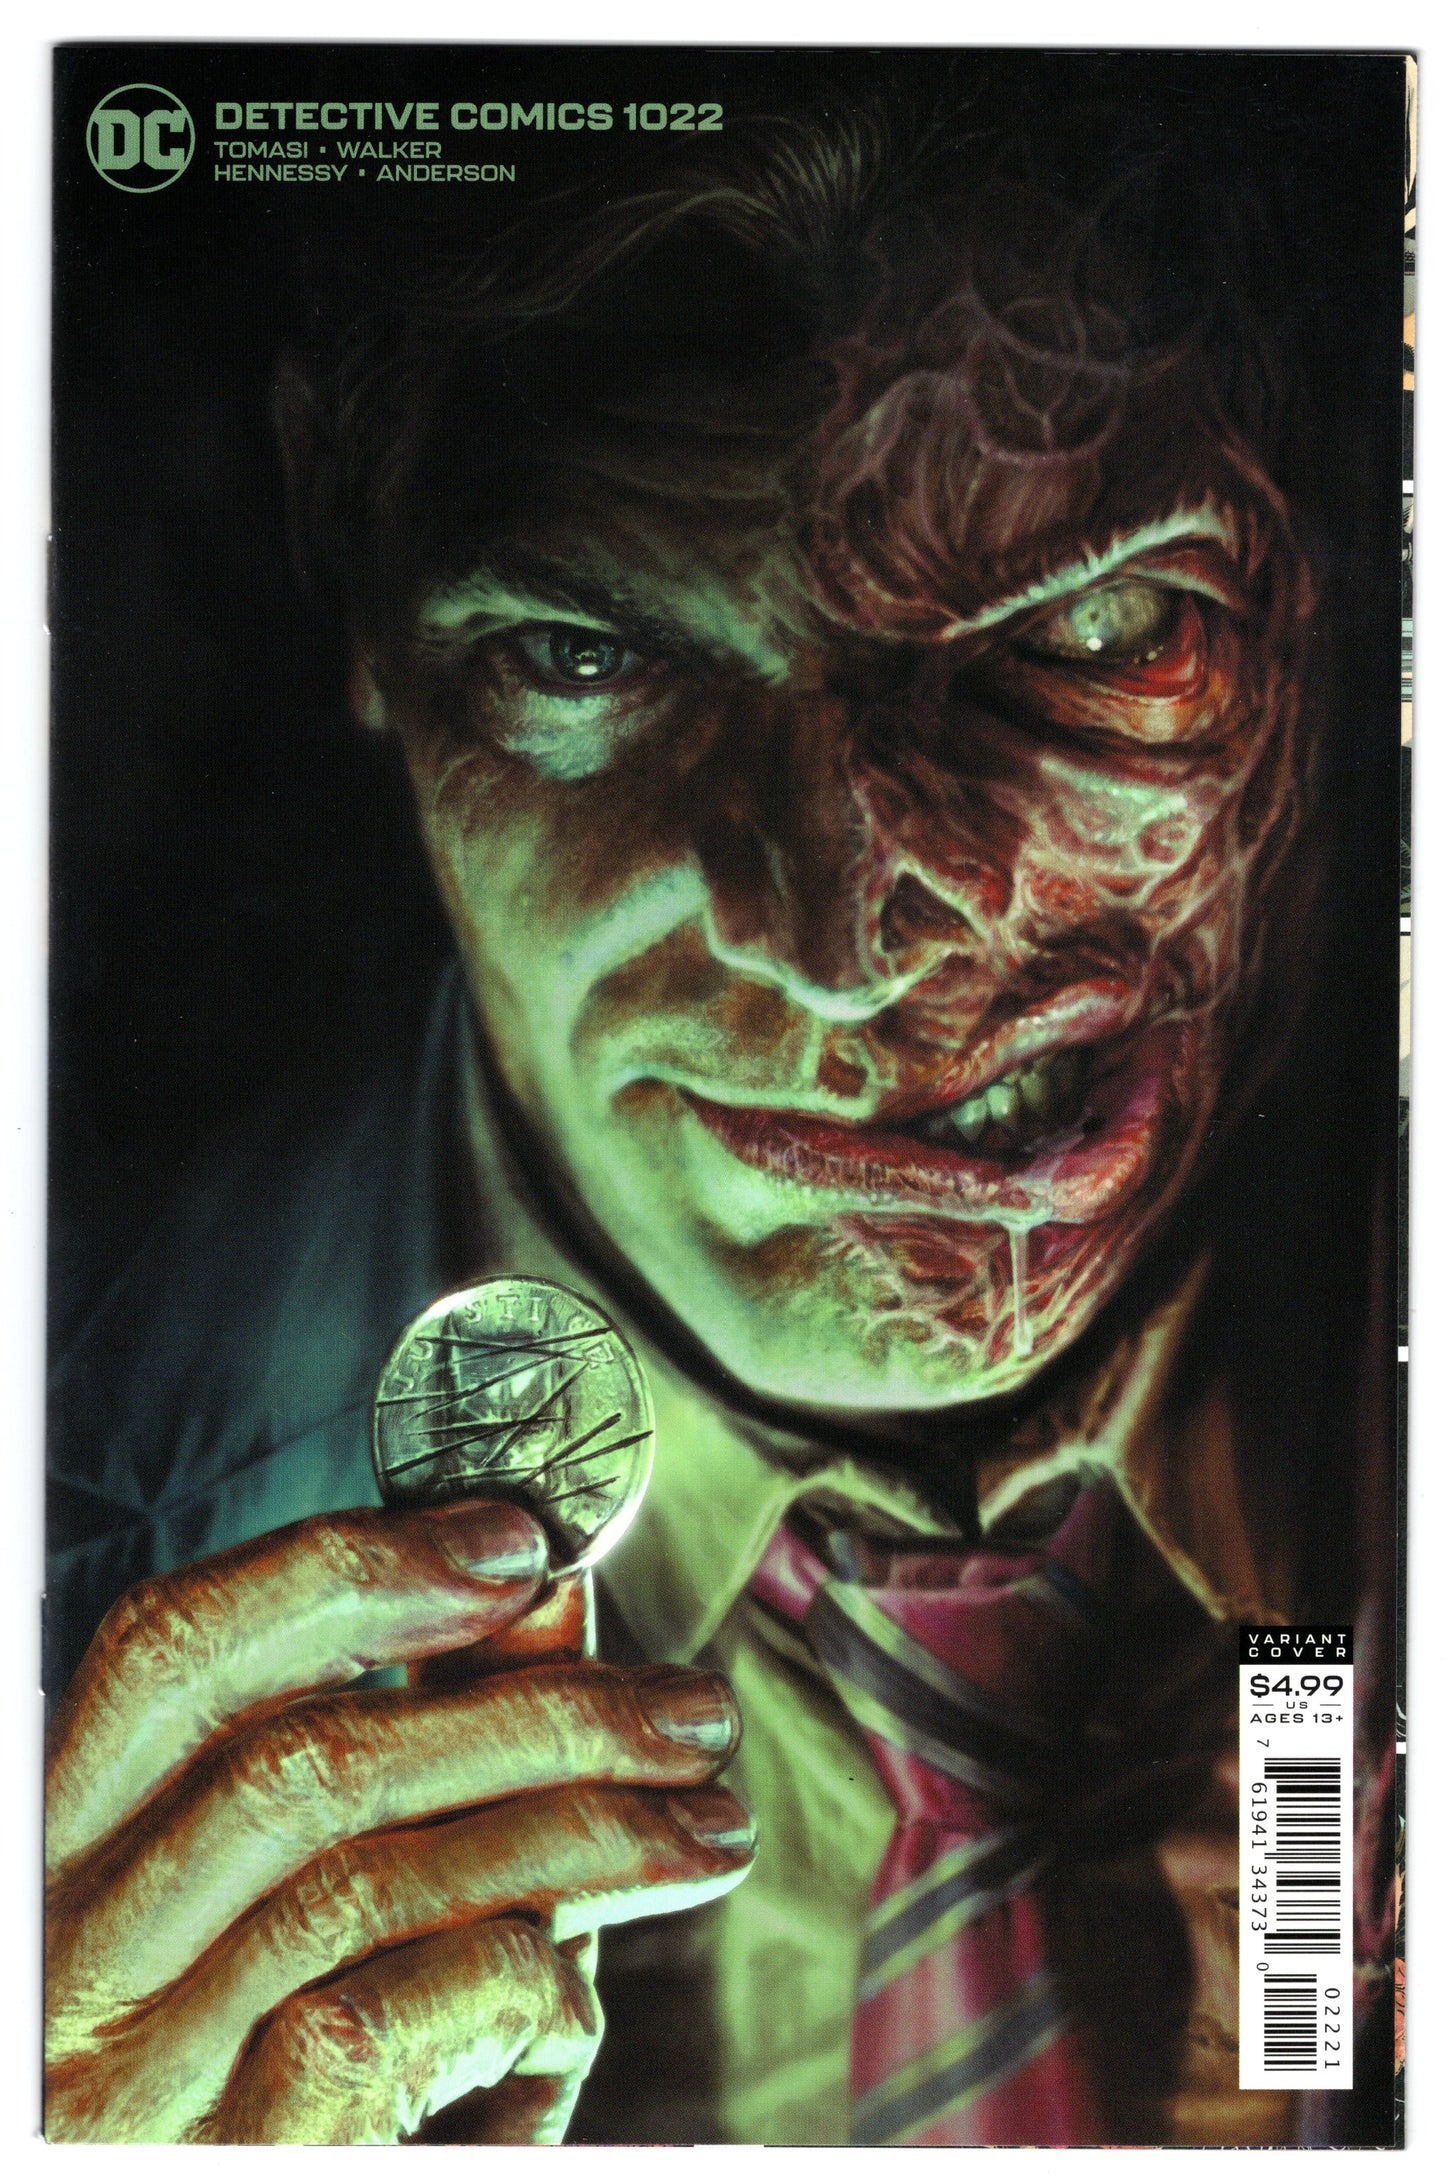 Detective Comics #1022 "Variant Lee Bermejoy Two-Face RARE Cover!" (July, 2020 - Marvel) NM+